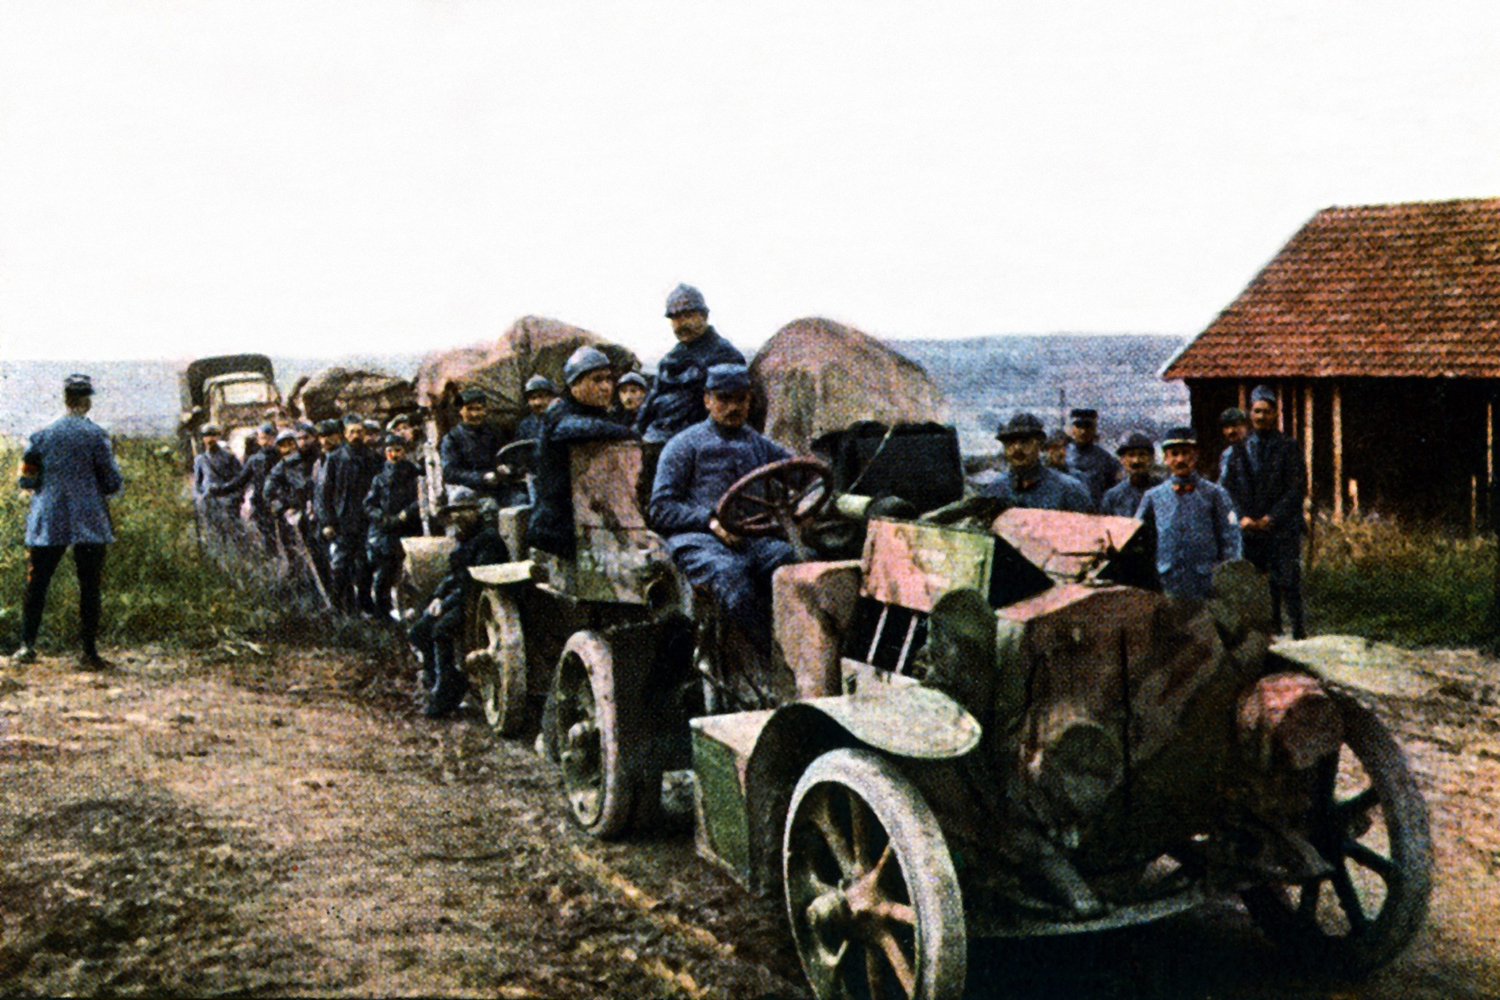 French soldiers and vehicles of the mobile air defense during the Battle of Verdun. Western Front. World War I.France, September 1916Autochrome LumièrePhoto: Jules Gervais-Courtellemont (1863 - 1931)